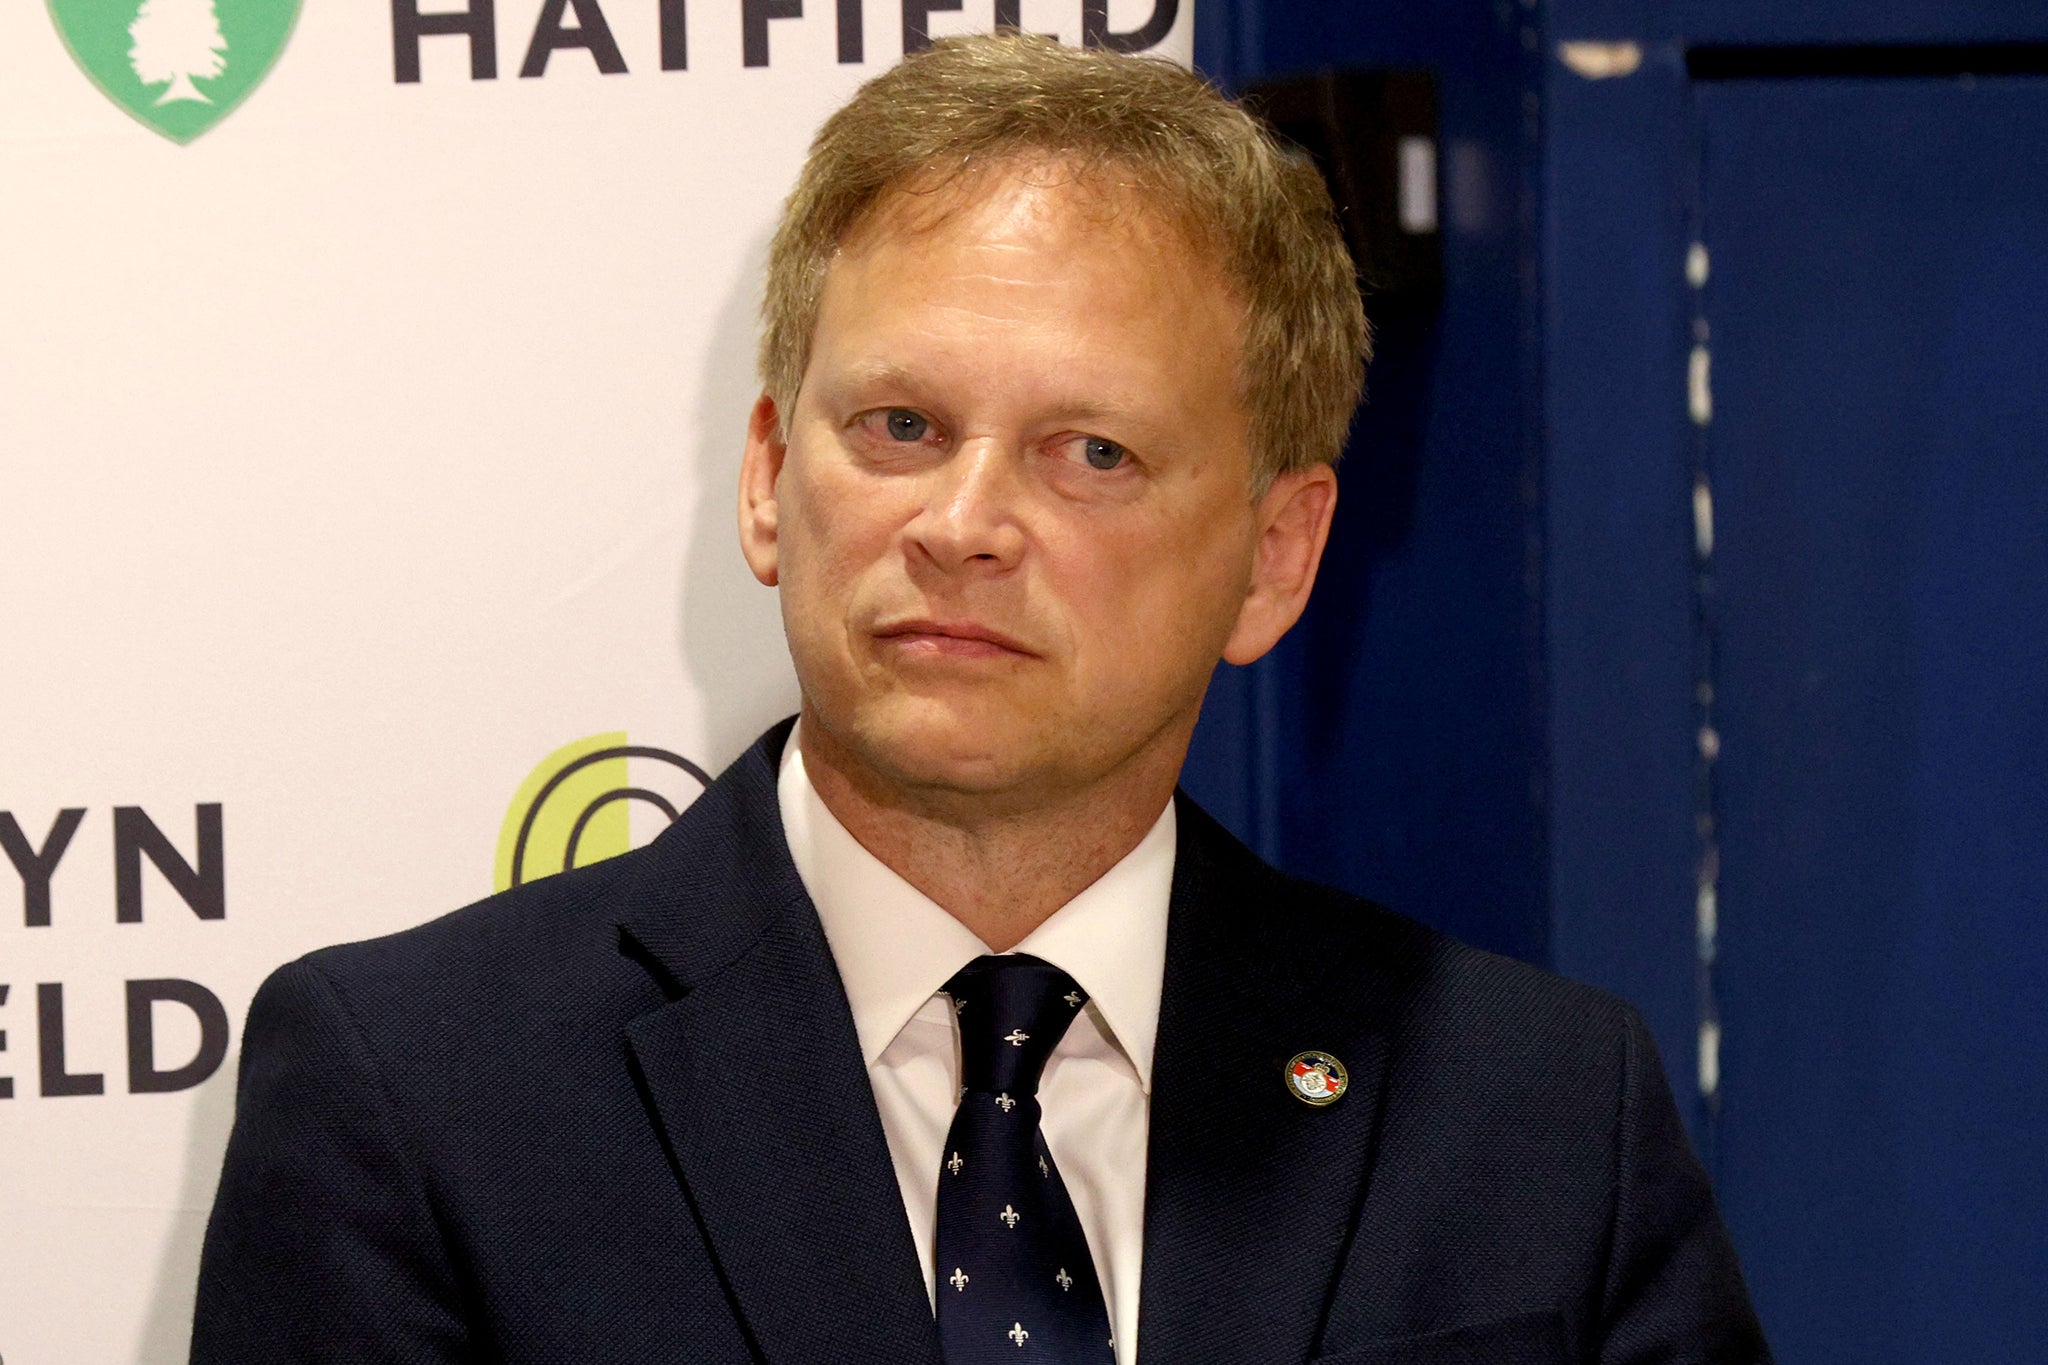 Grant Shapps was one of the first big beasts to fall